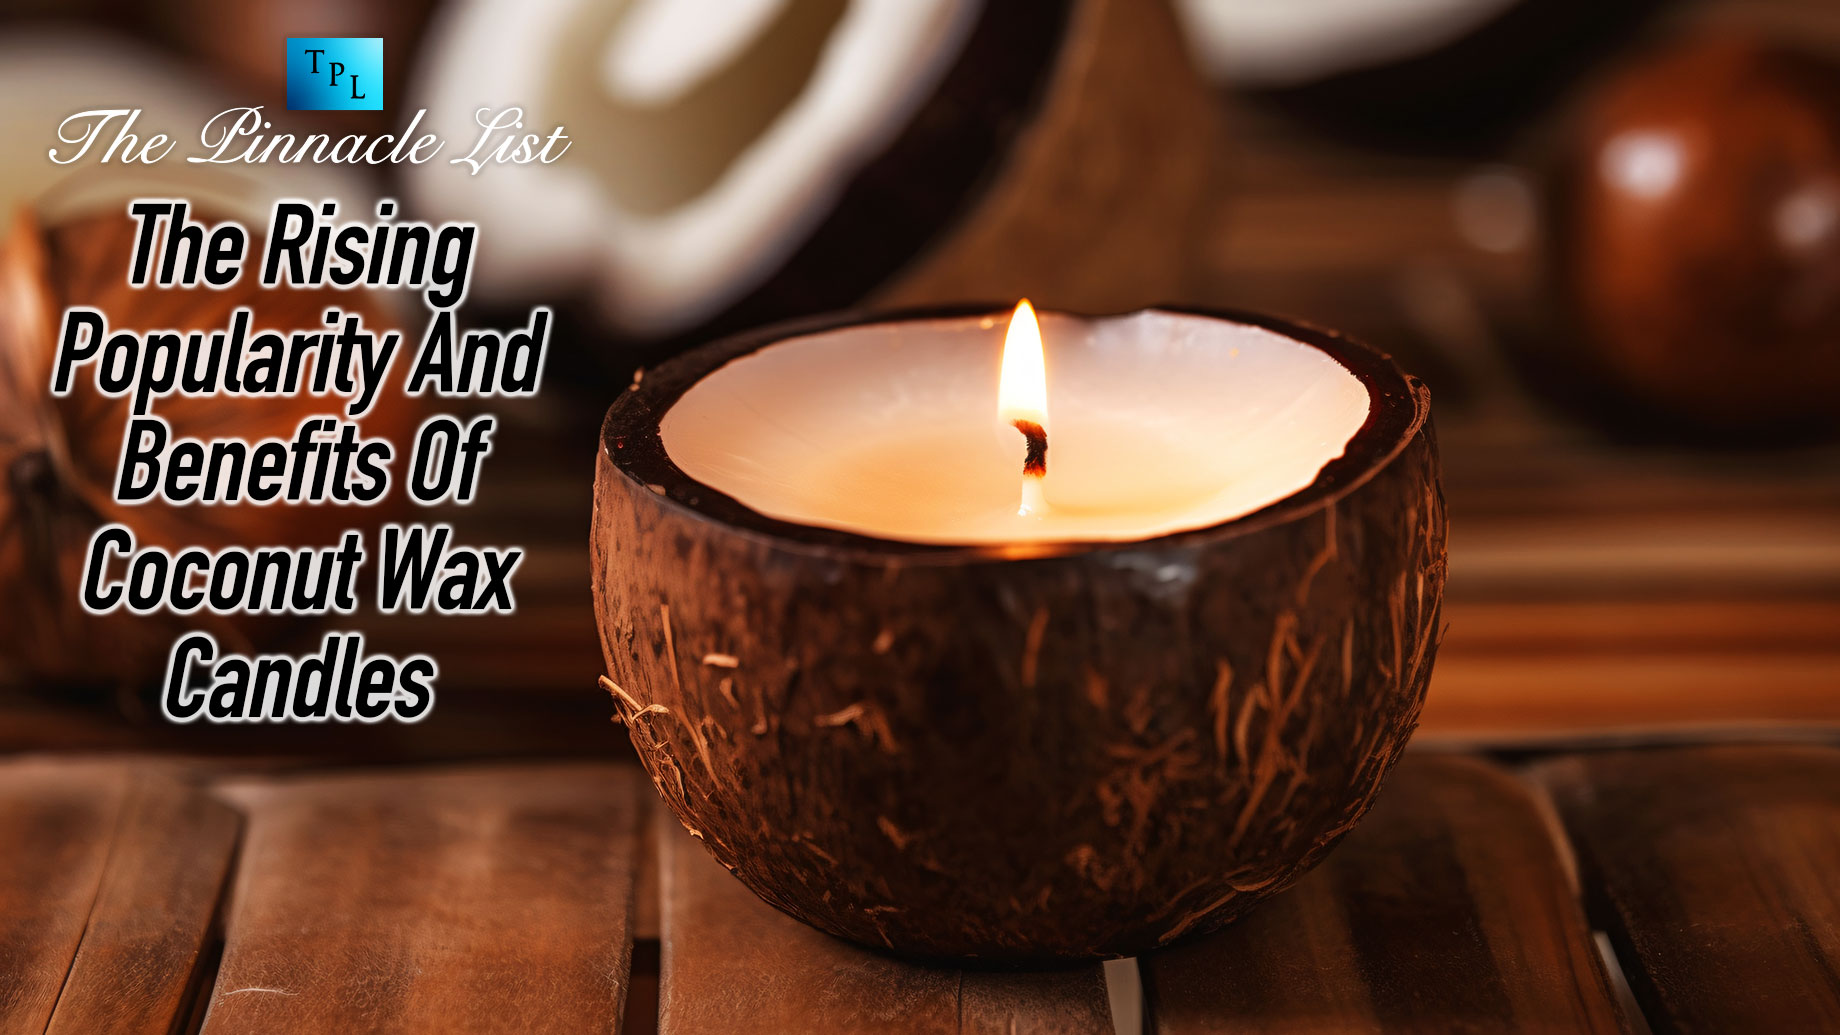 The Rising Popularity And Benefits Of Coconut Wax Candles